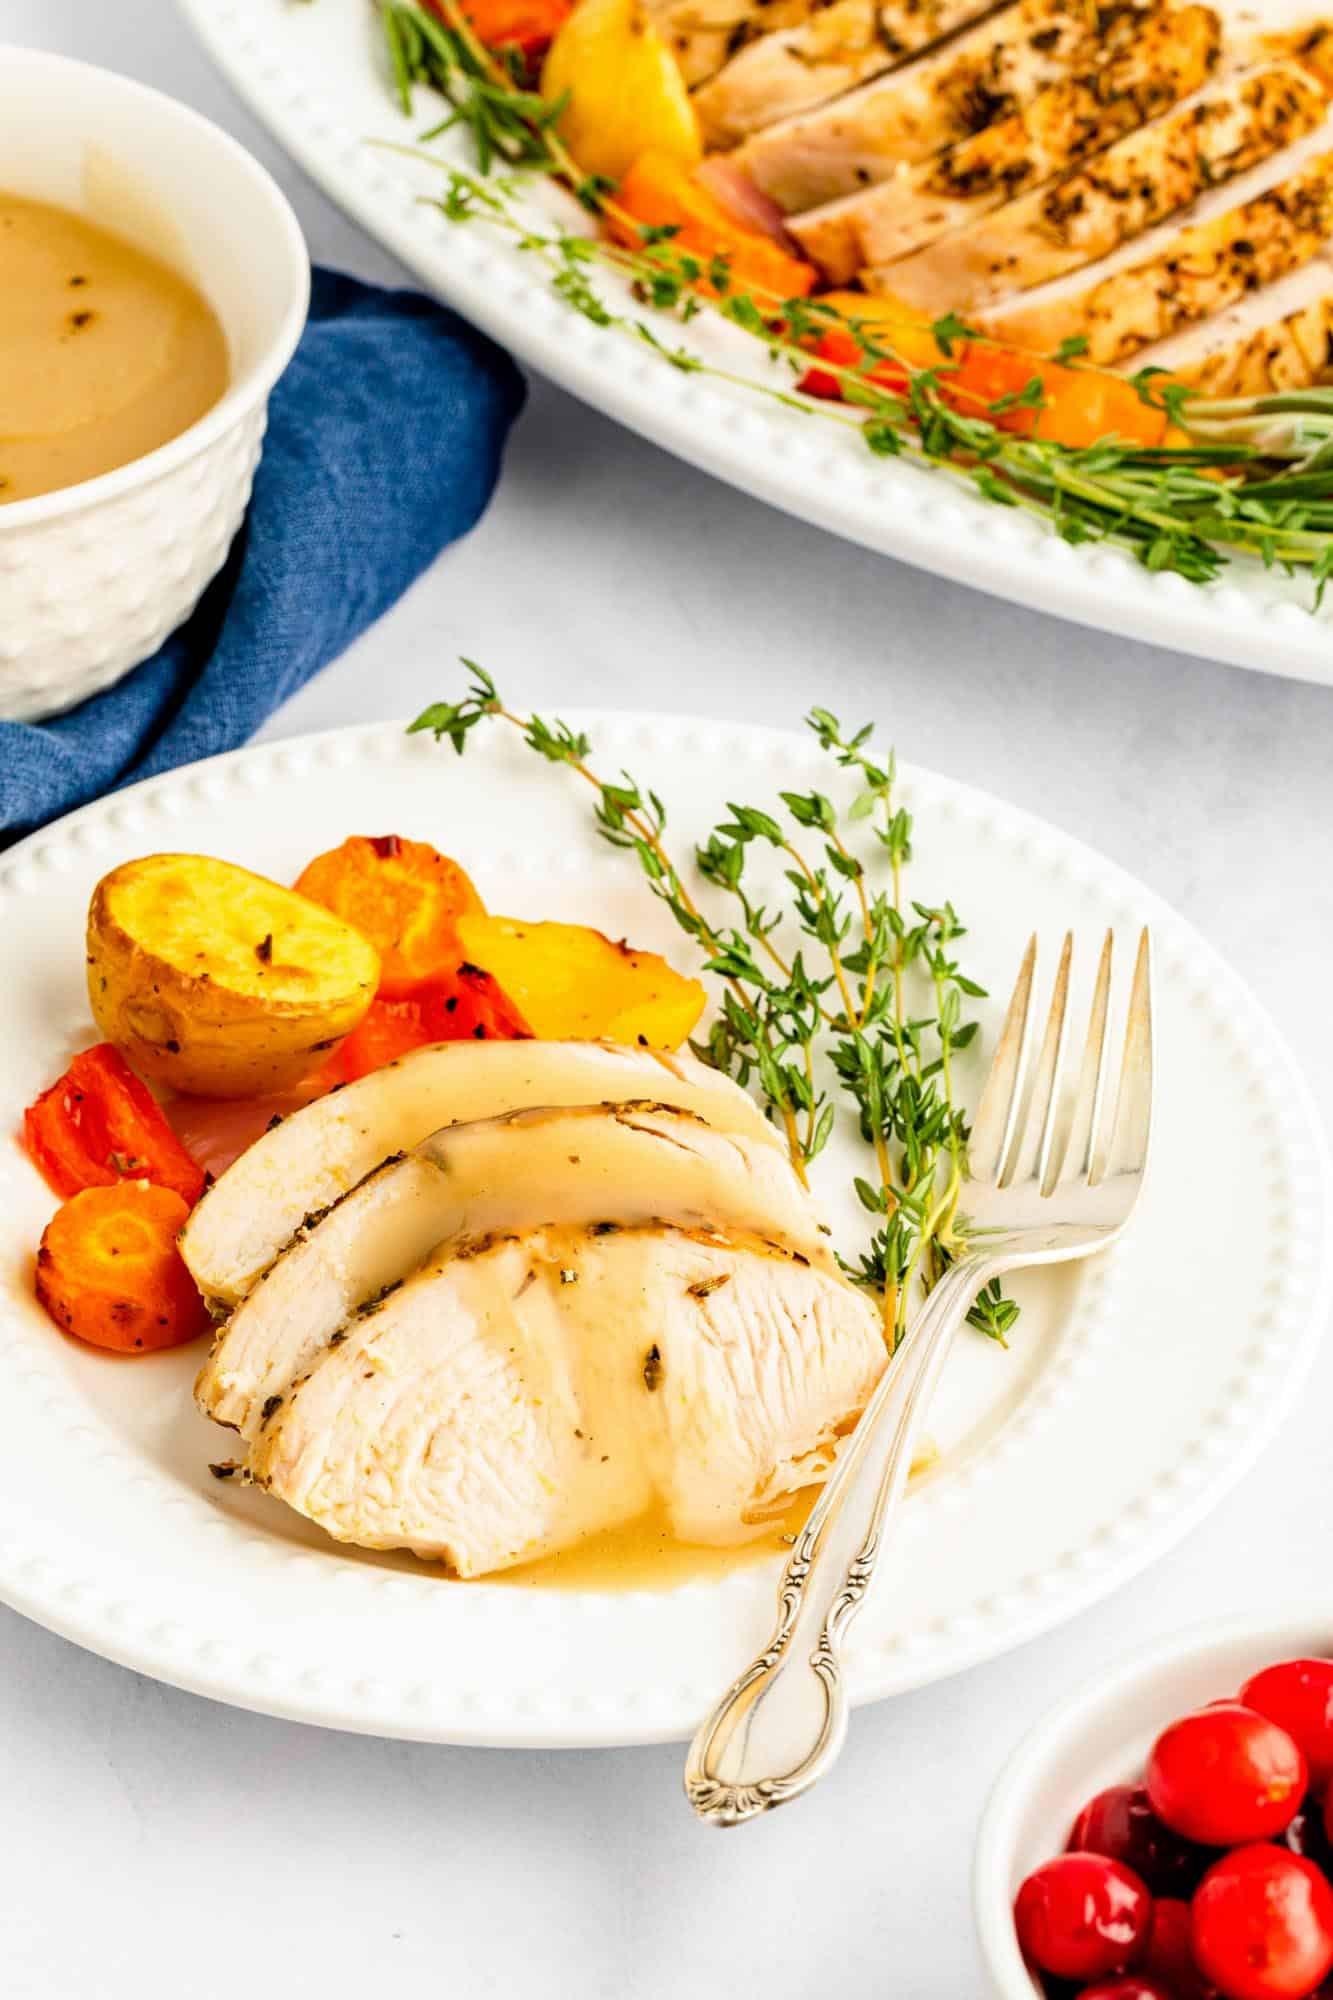 Slices of roast turkey tenderloin served on a small white plate with gravy and roasted vegetables